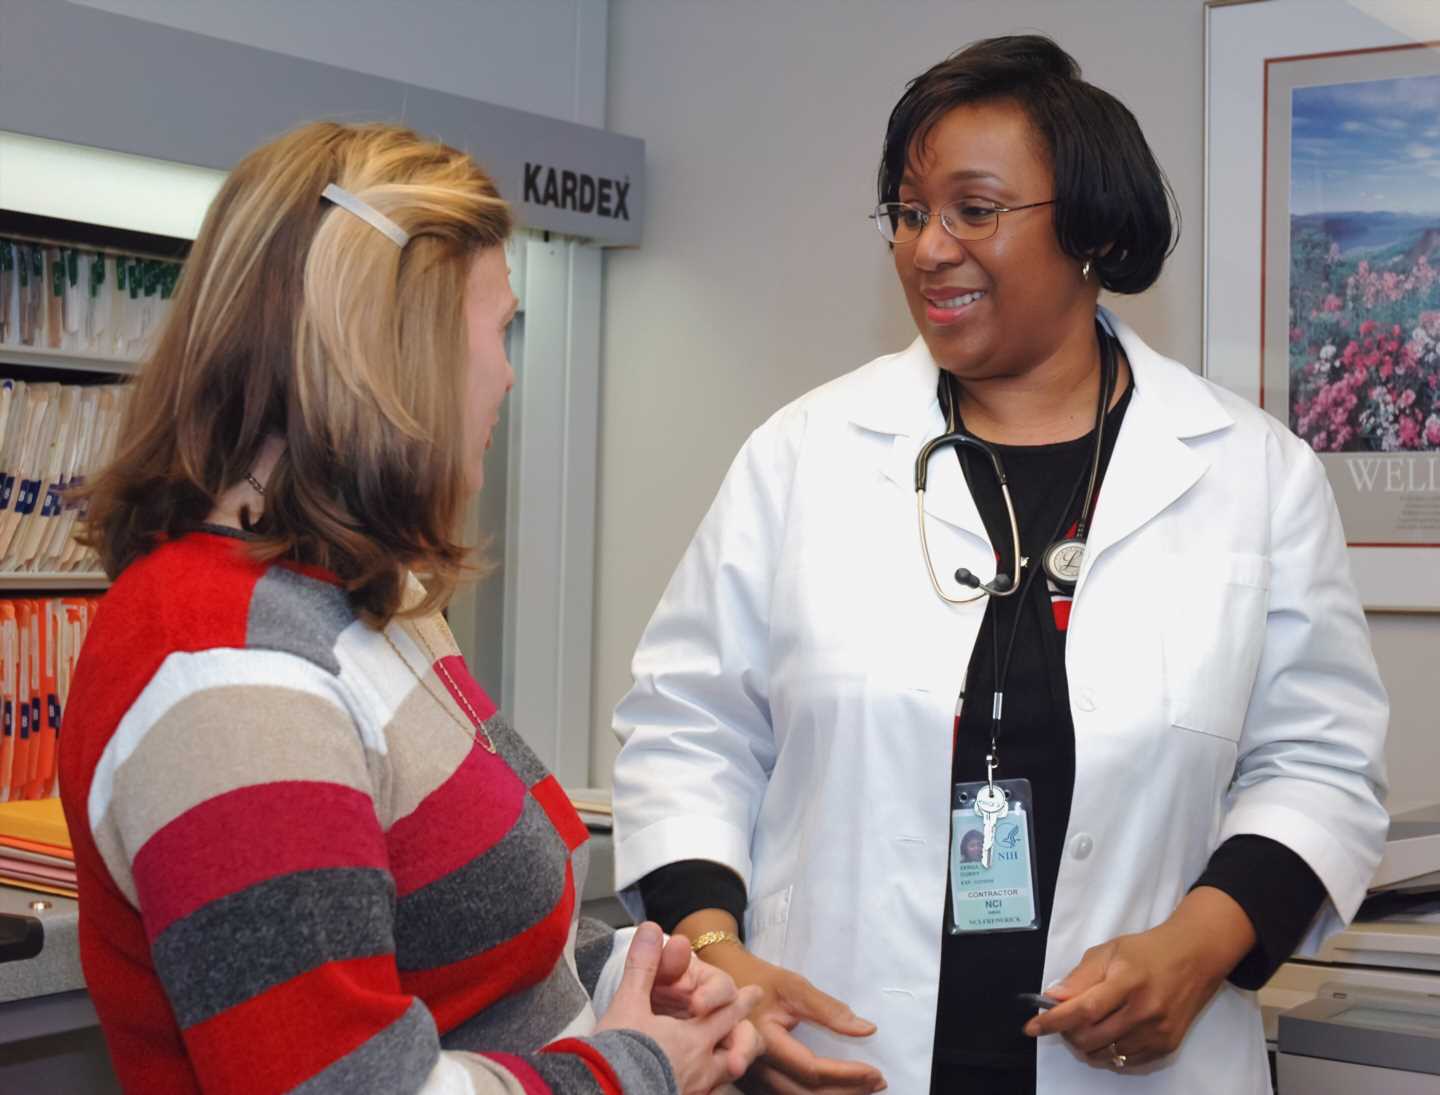 Video: How to have a productive visit with your health care professional